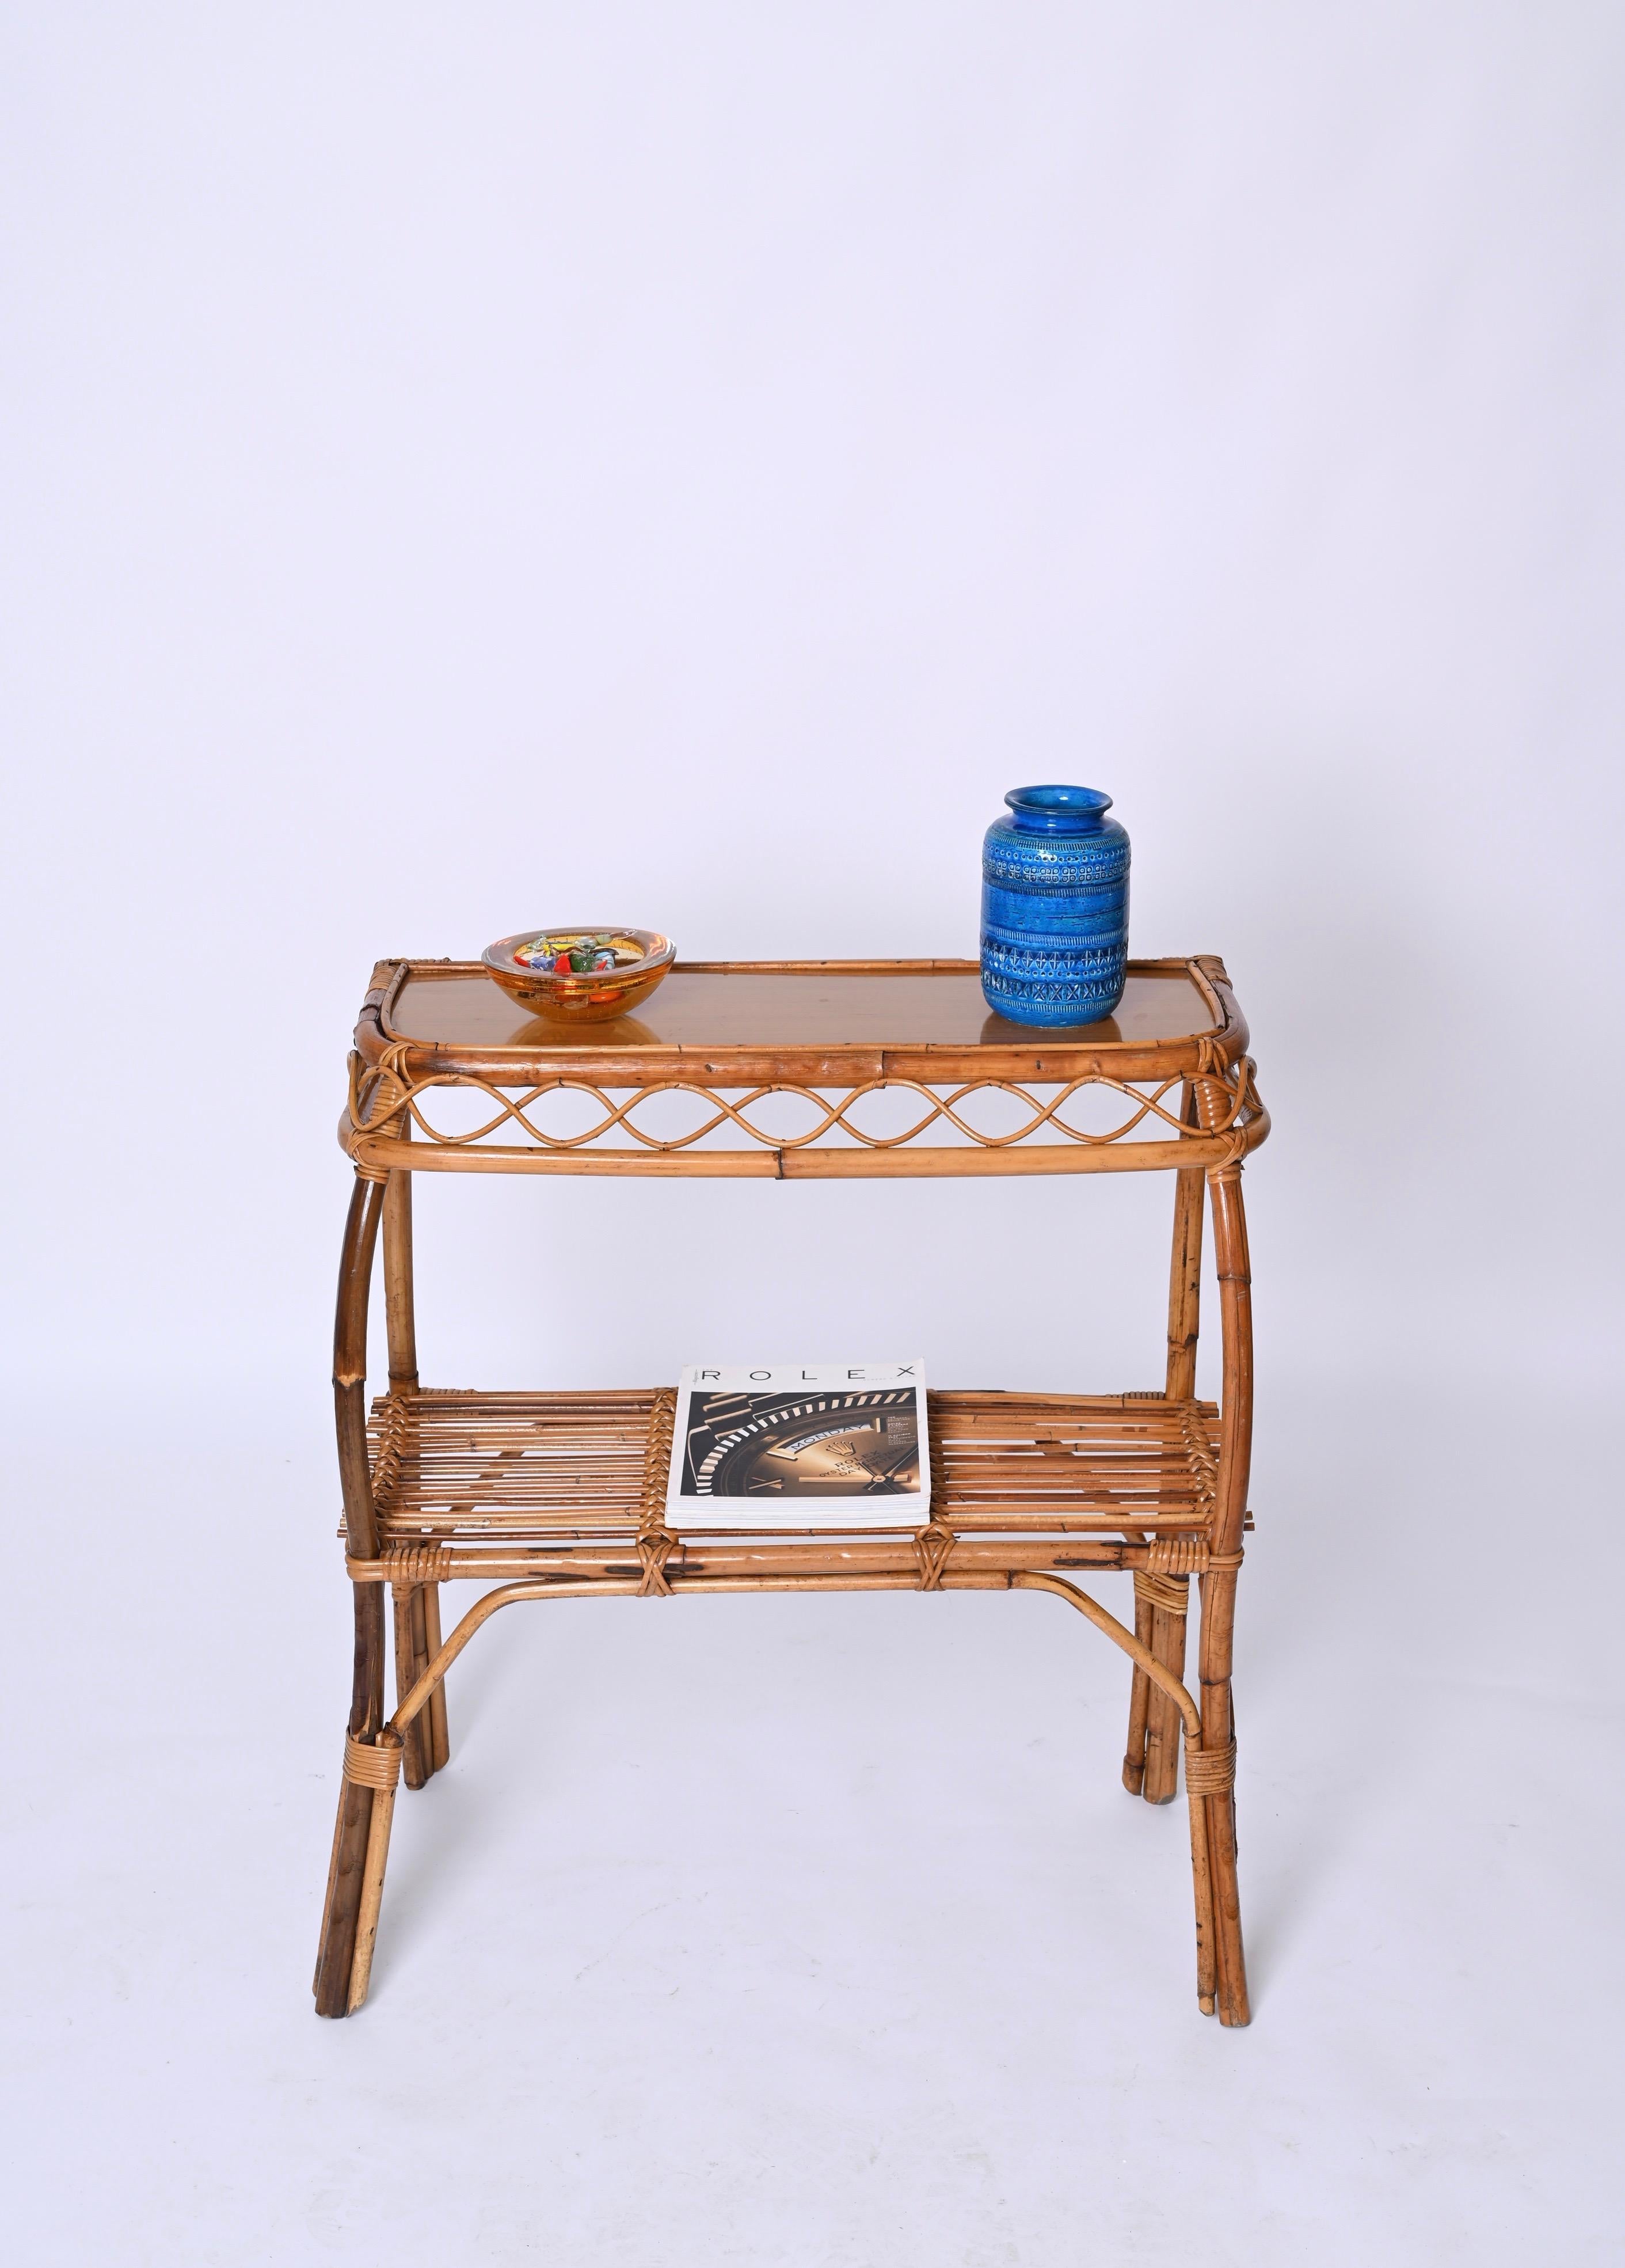 Midcentury Bamboo and Rattan Cocktail Console Table after Franco Albini, 1960s For Sale 10